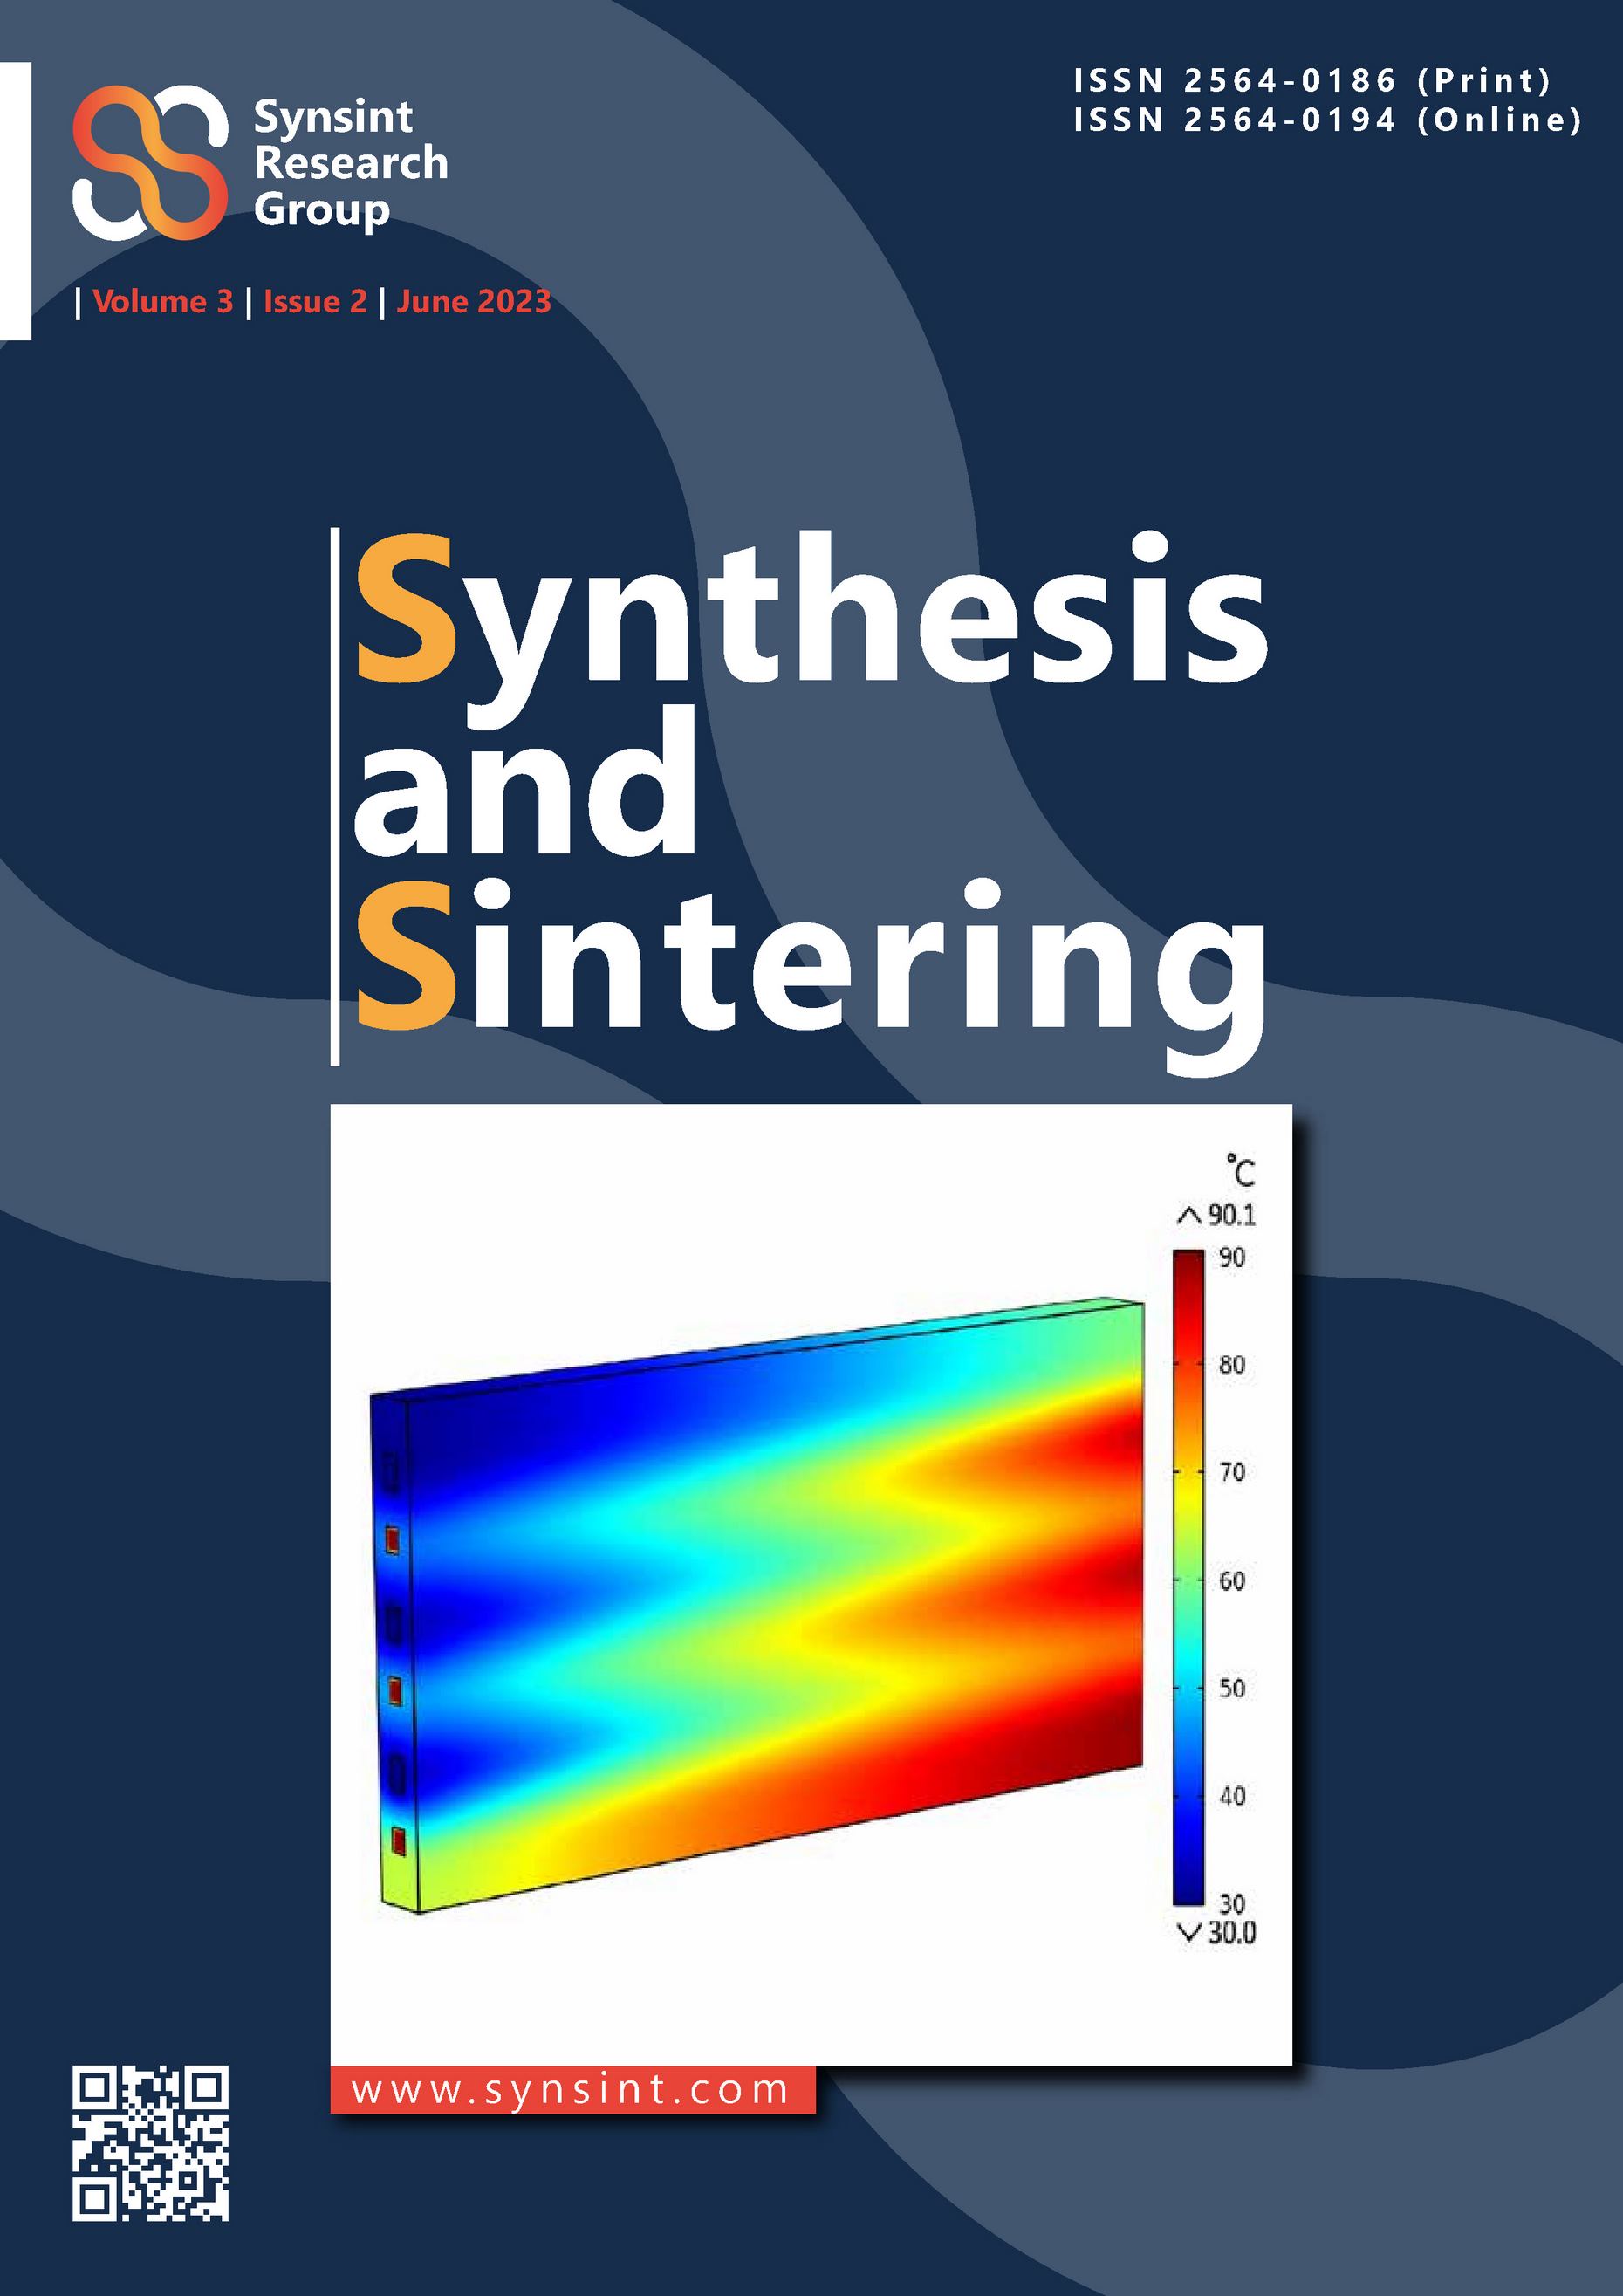 Synthesis and Sintering Vol. 3 No. 2 (2023)